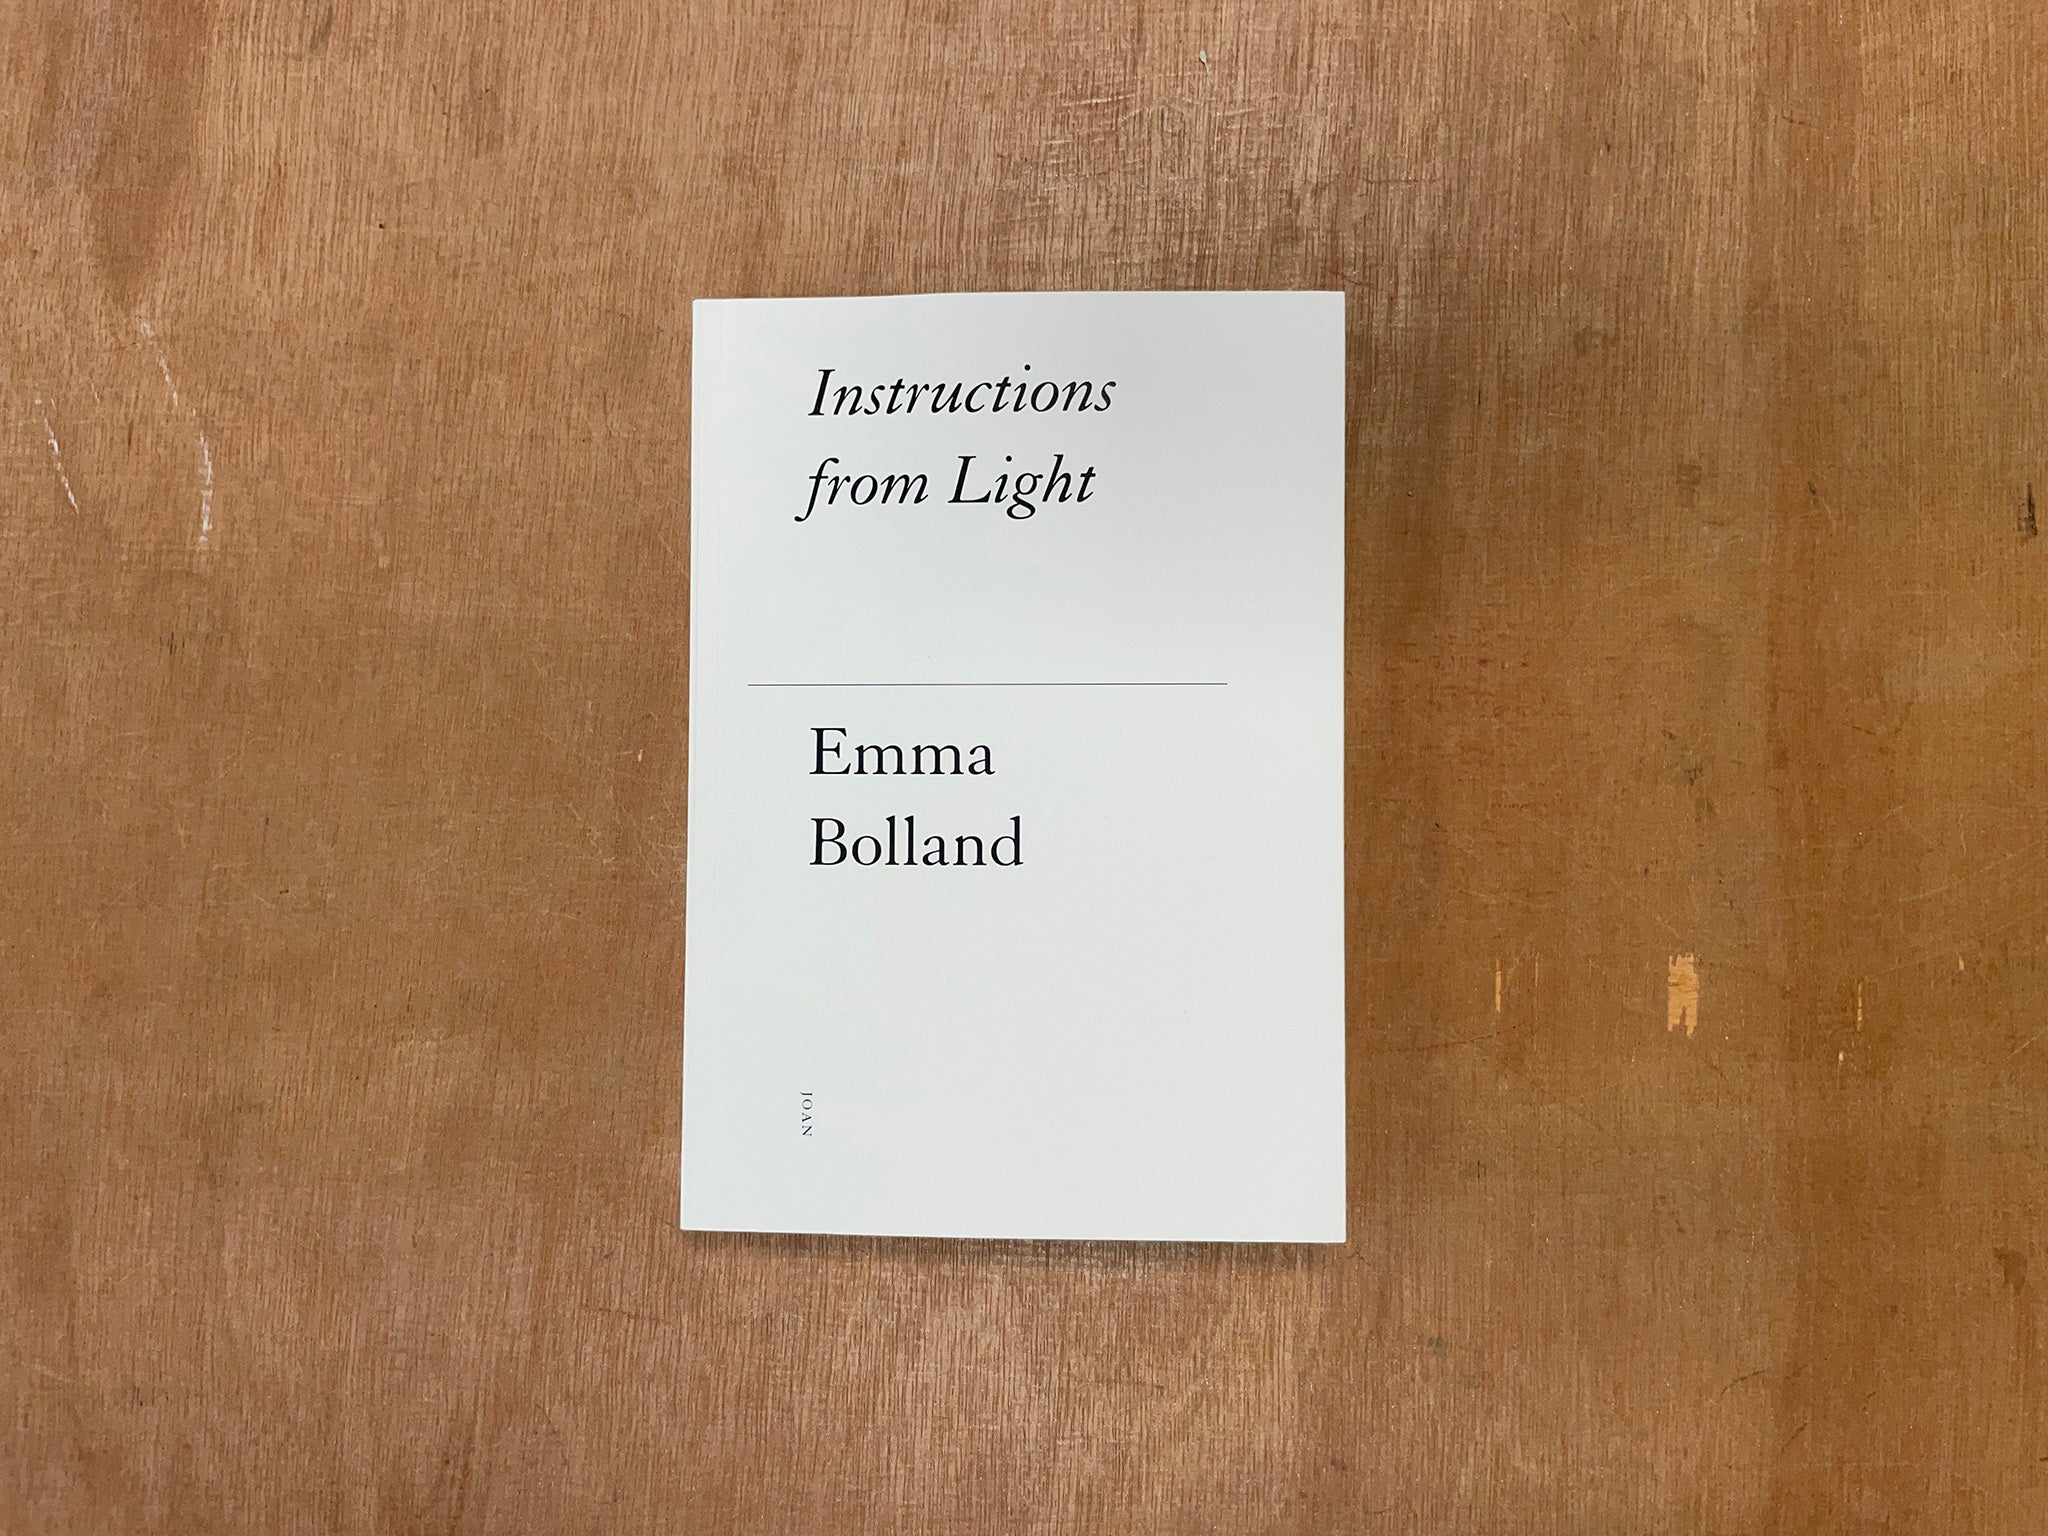 INSTRUCTIONS FROM LIGHT by Emma Bolland